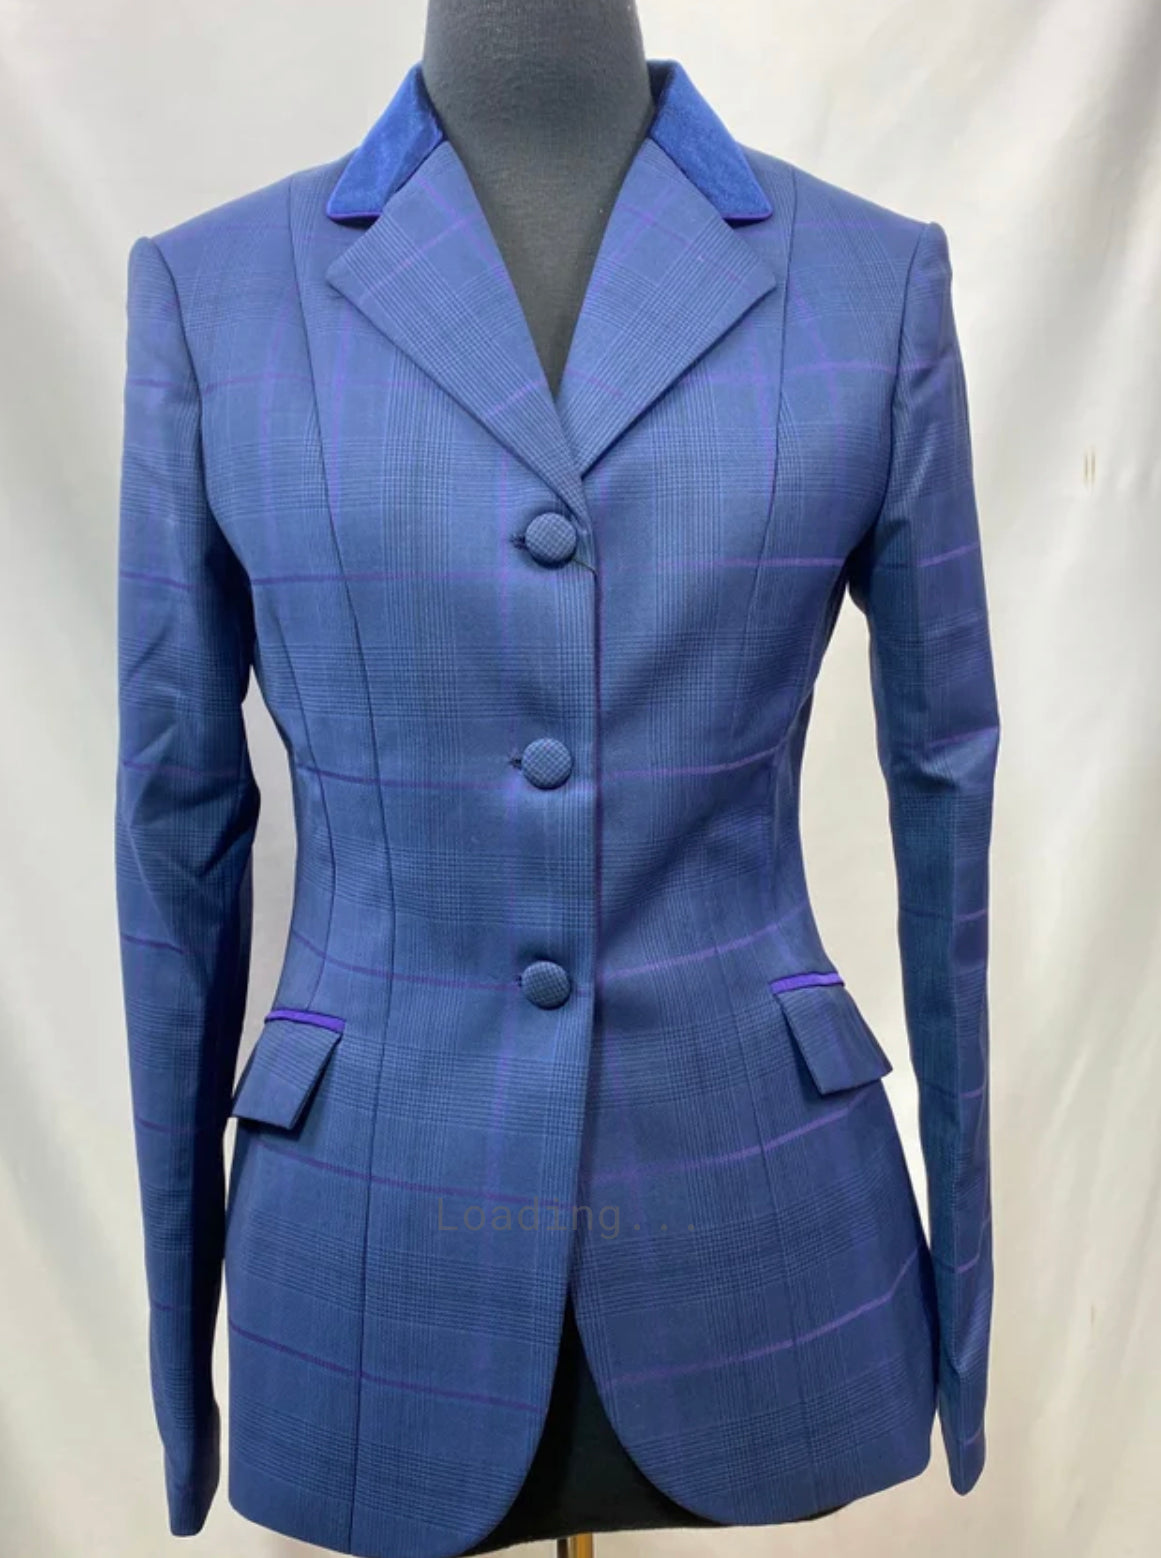 English Show Coat Navy With Purple Plaid Accents Fabric Code Ez4730-5